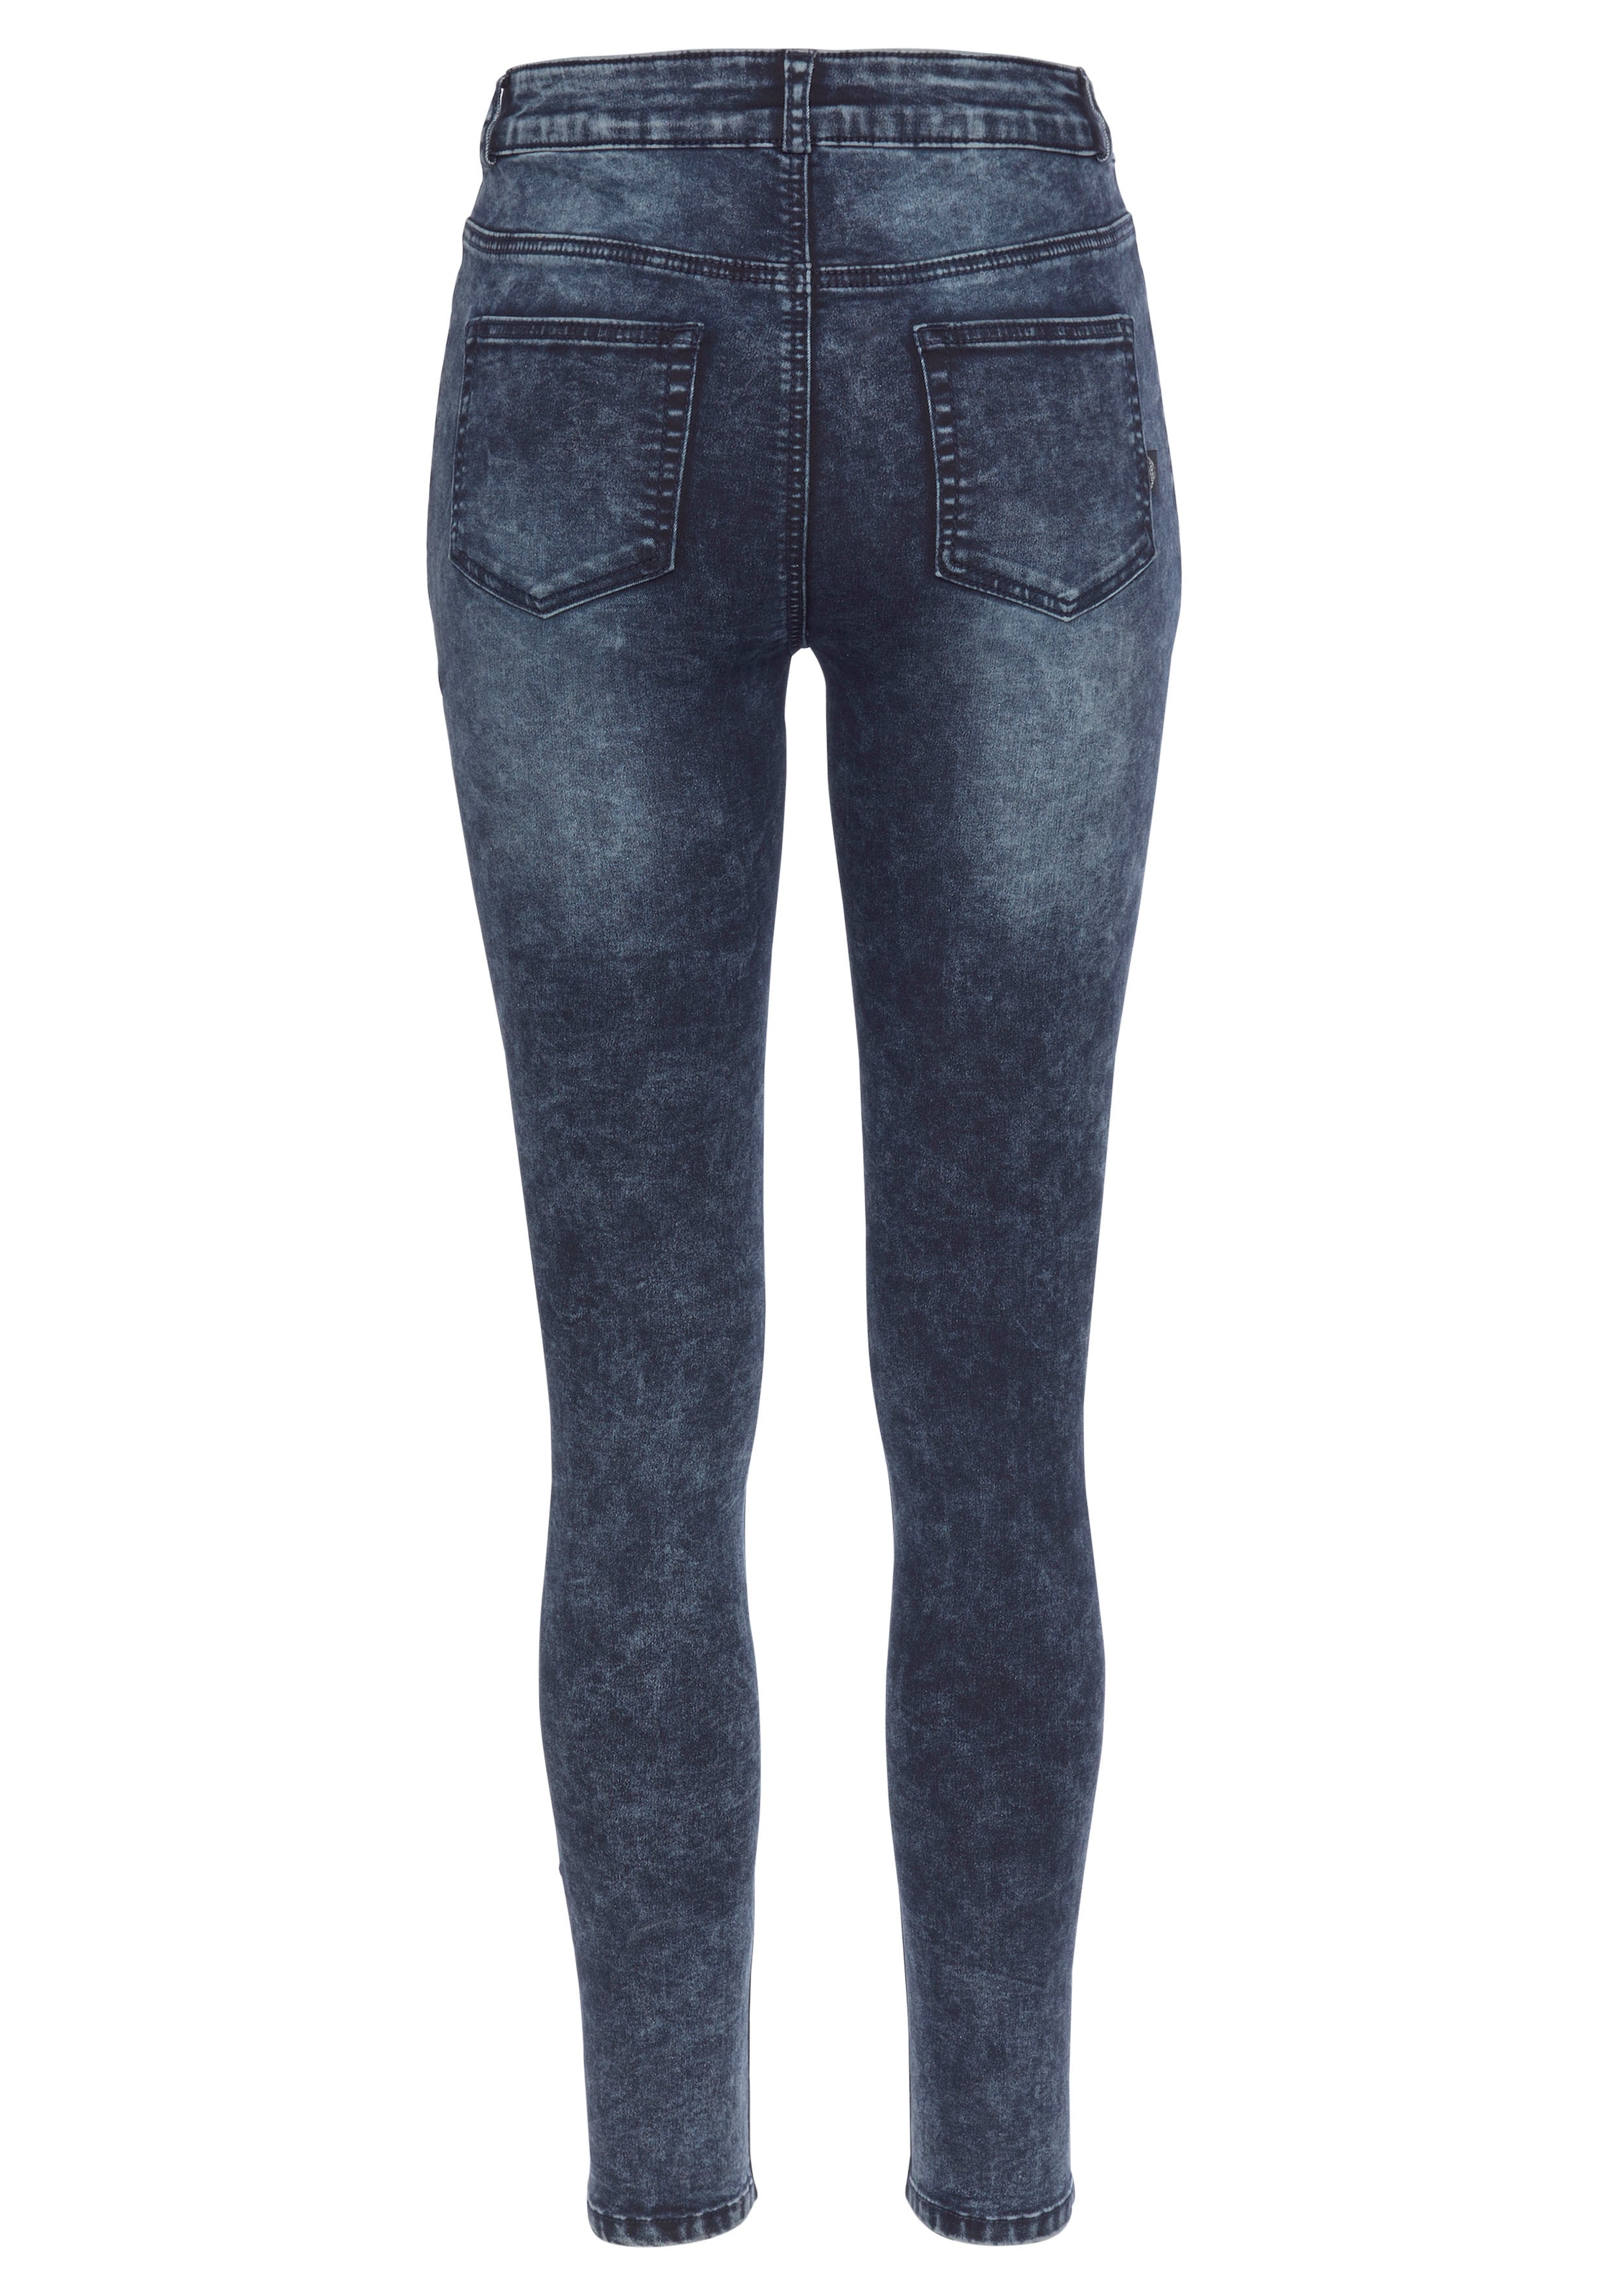 Arizona »Ultra washed«, Stretch Moonwashed I\'m walking | shoppen Jeans moon Skinny-fit-Jeans